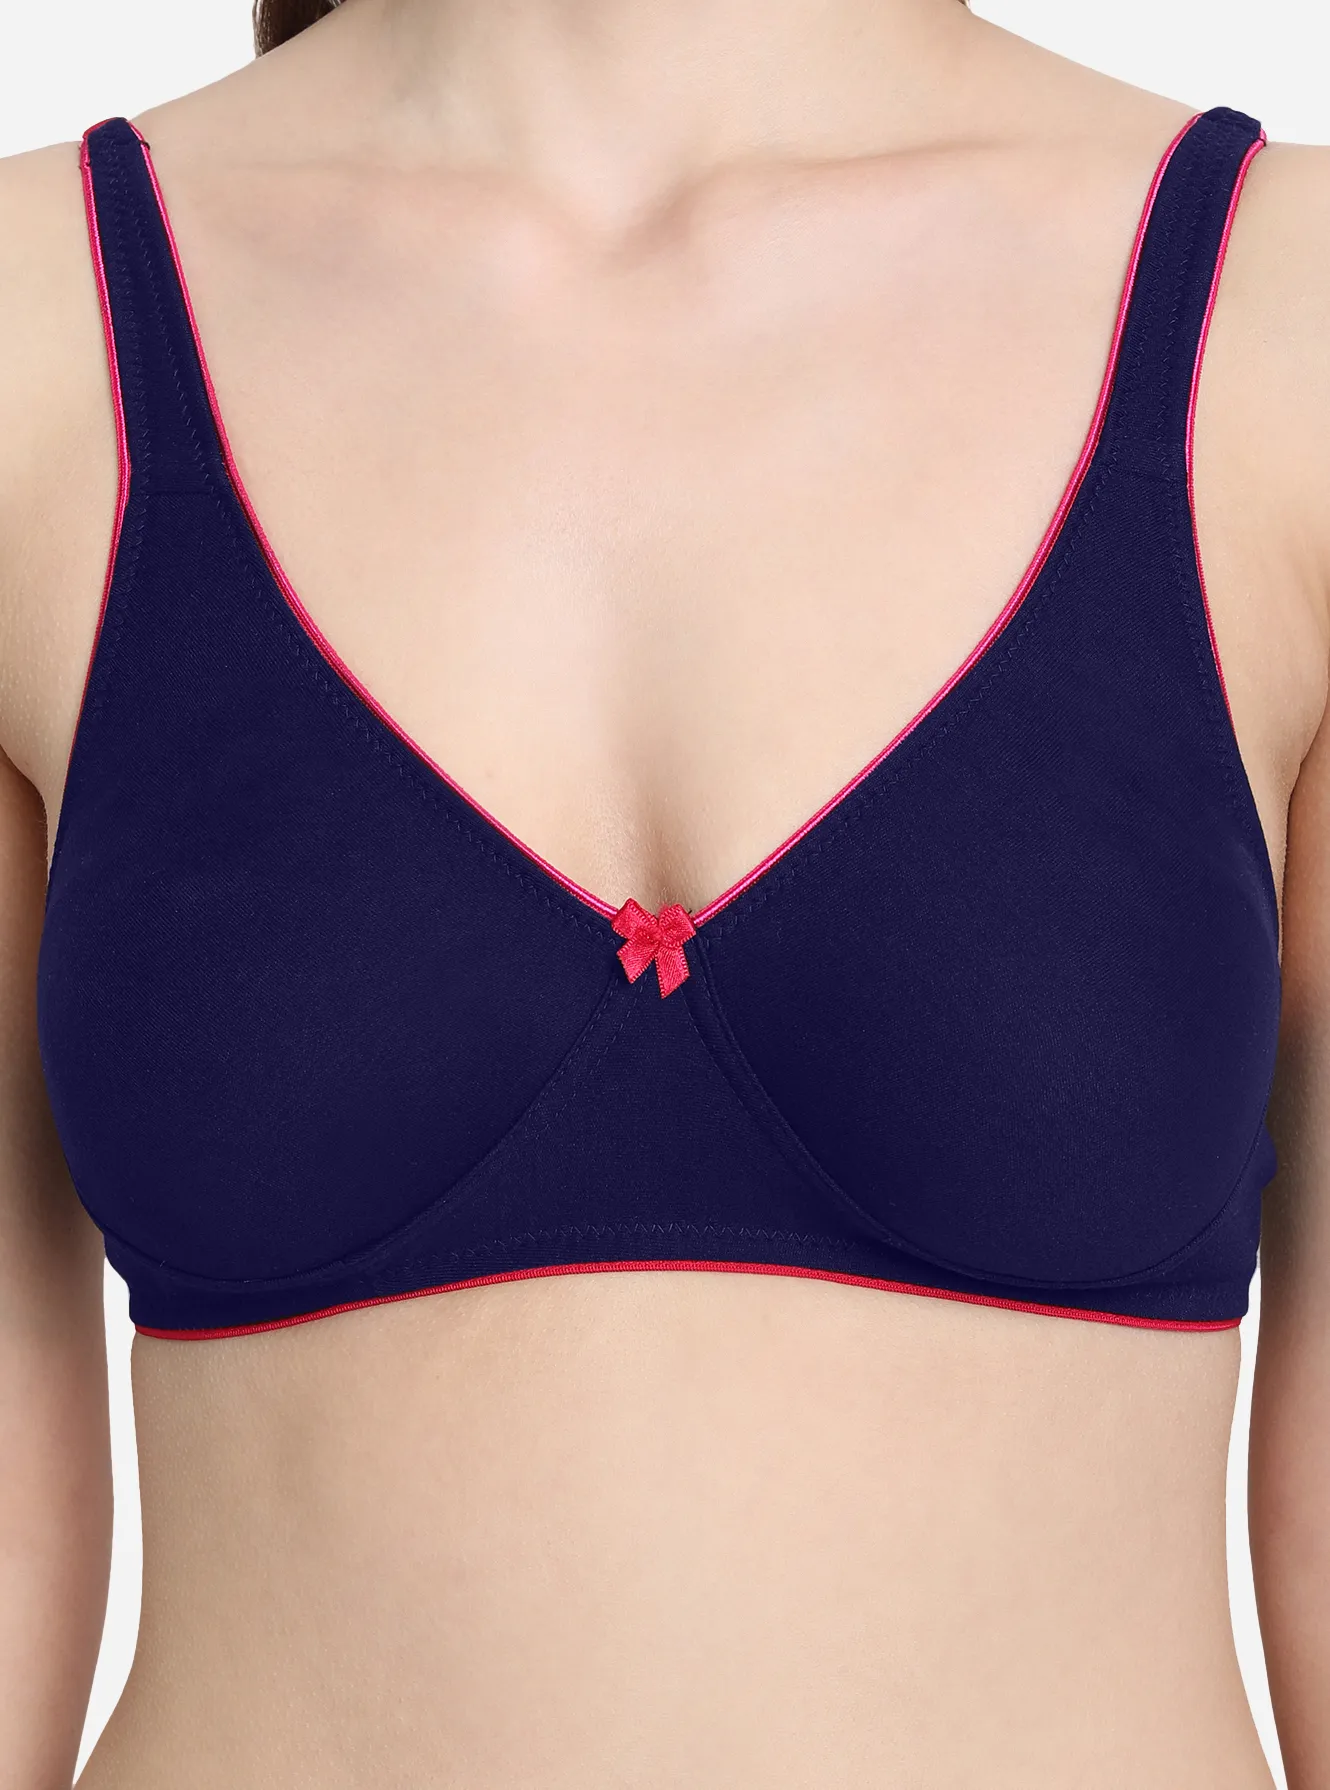 Camisole style double layered slip-on bra with adjustable straps